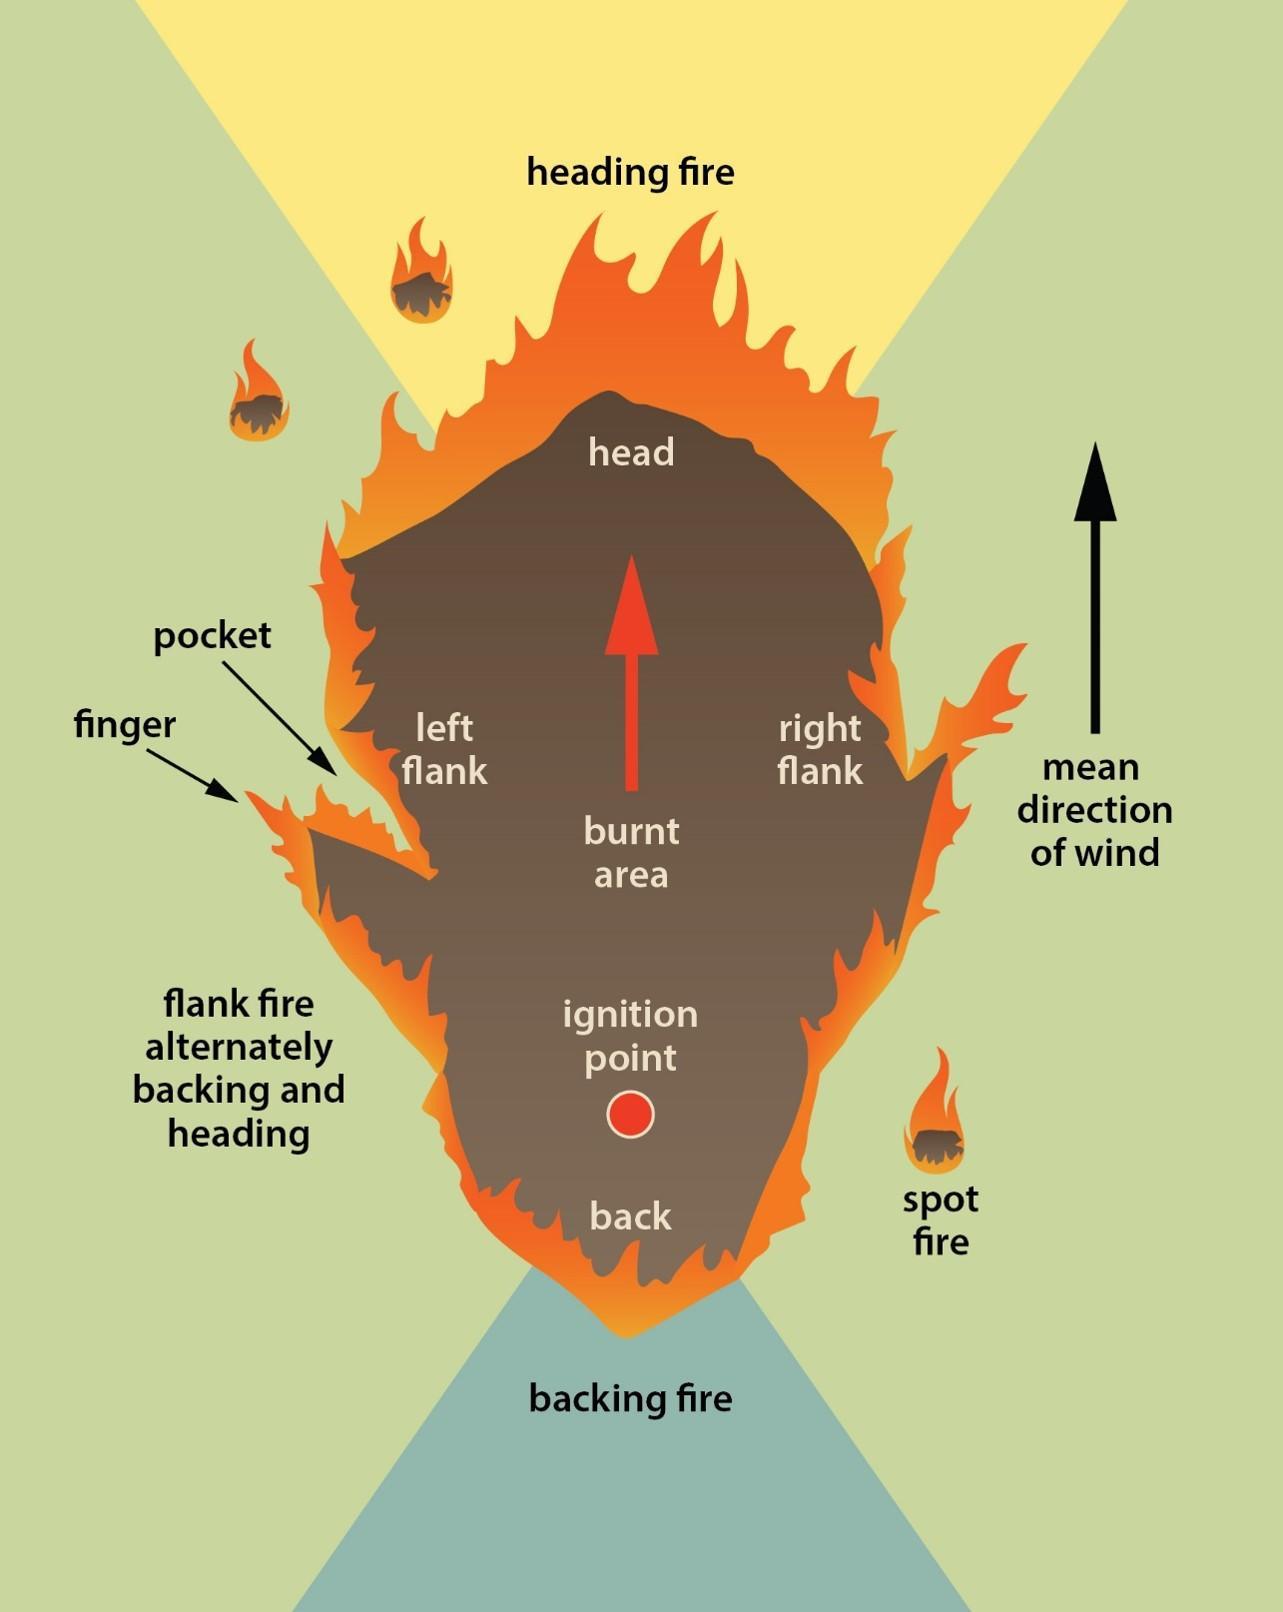 parts of a fire, heading fire, backing fire, flanks, head, back finger, pocket